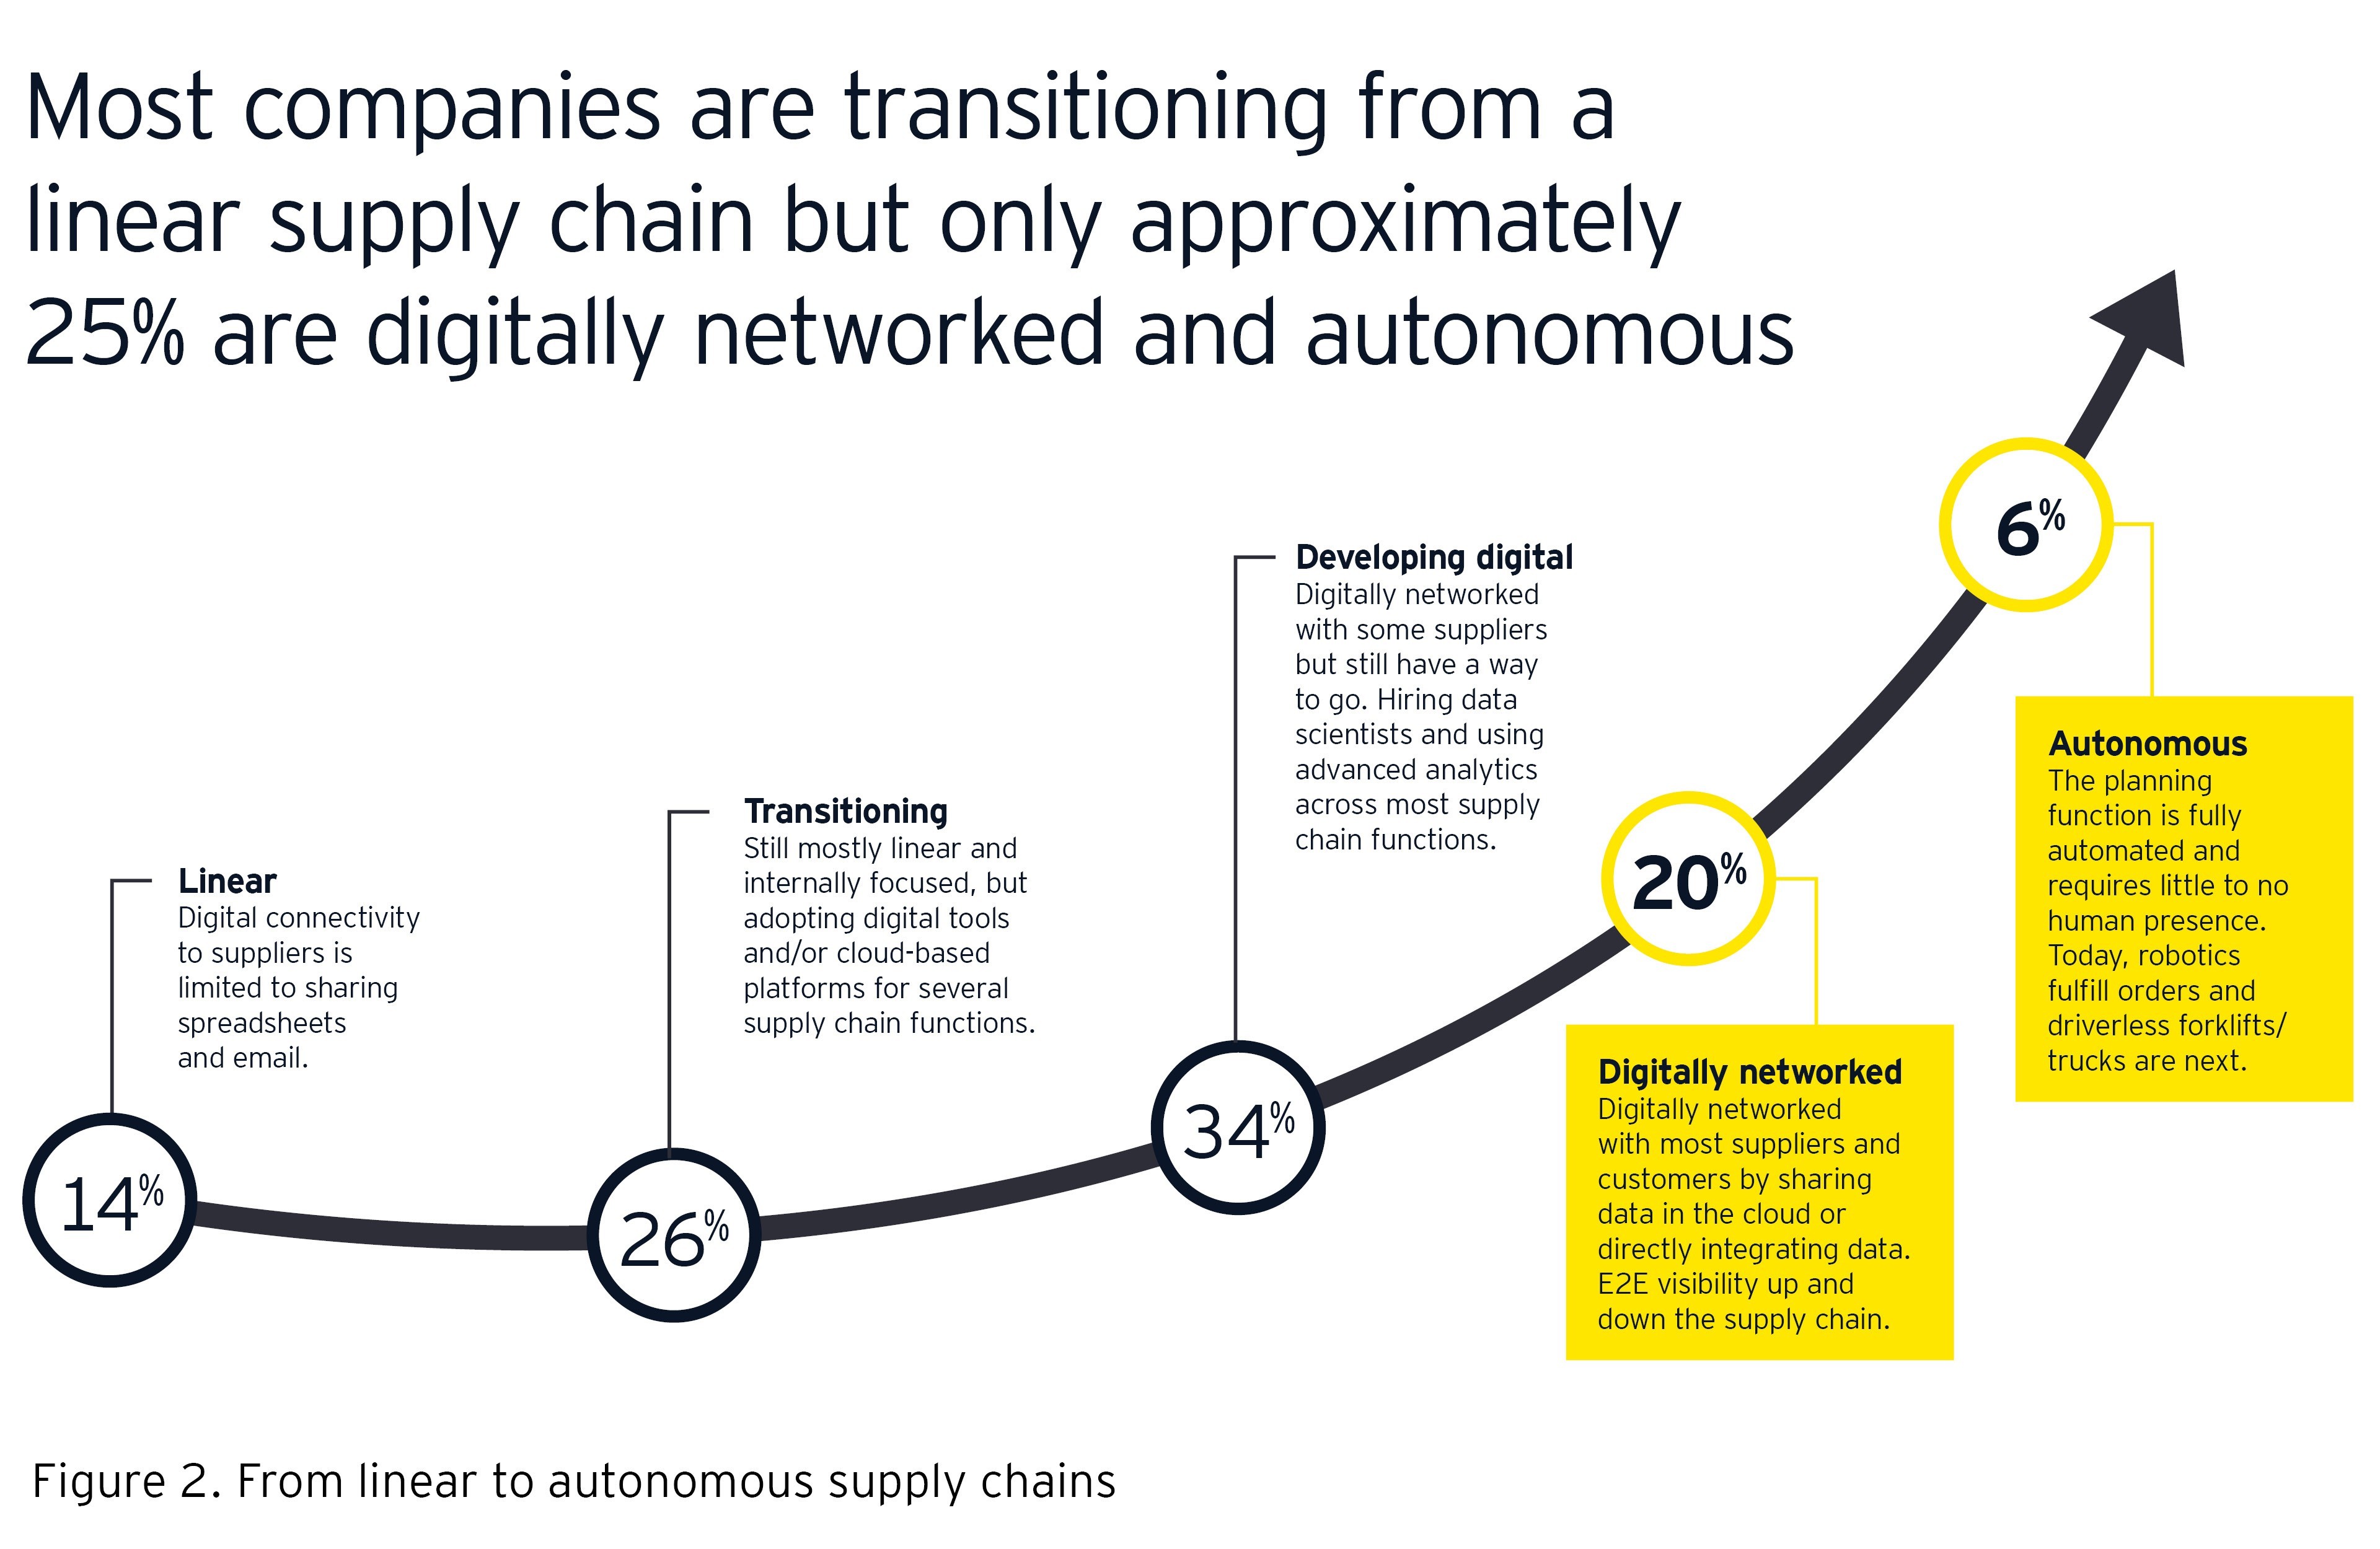 From linear to autonomous supply chains